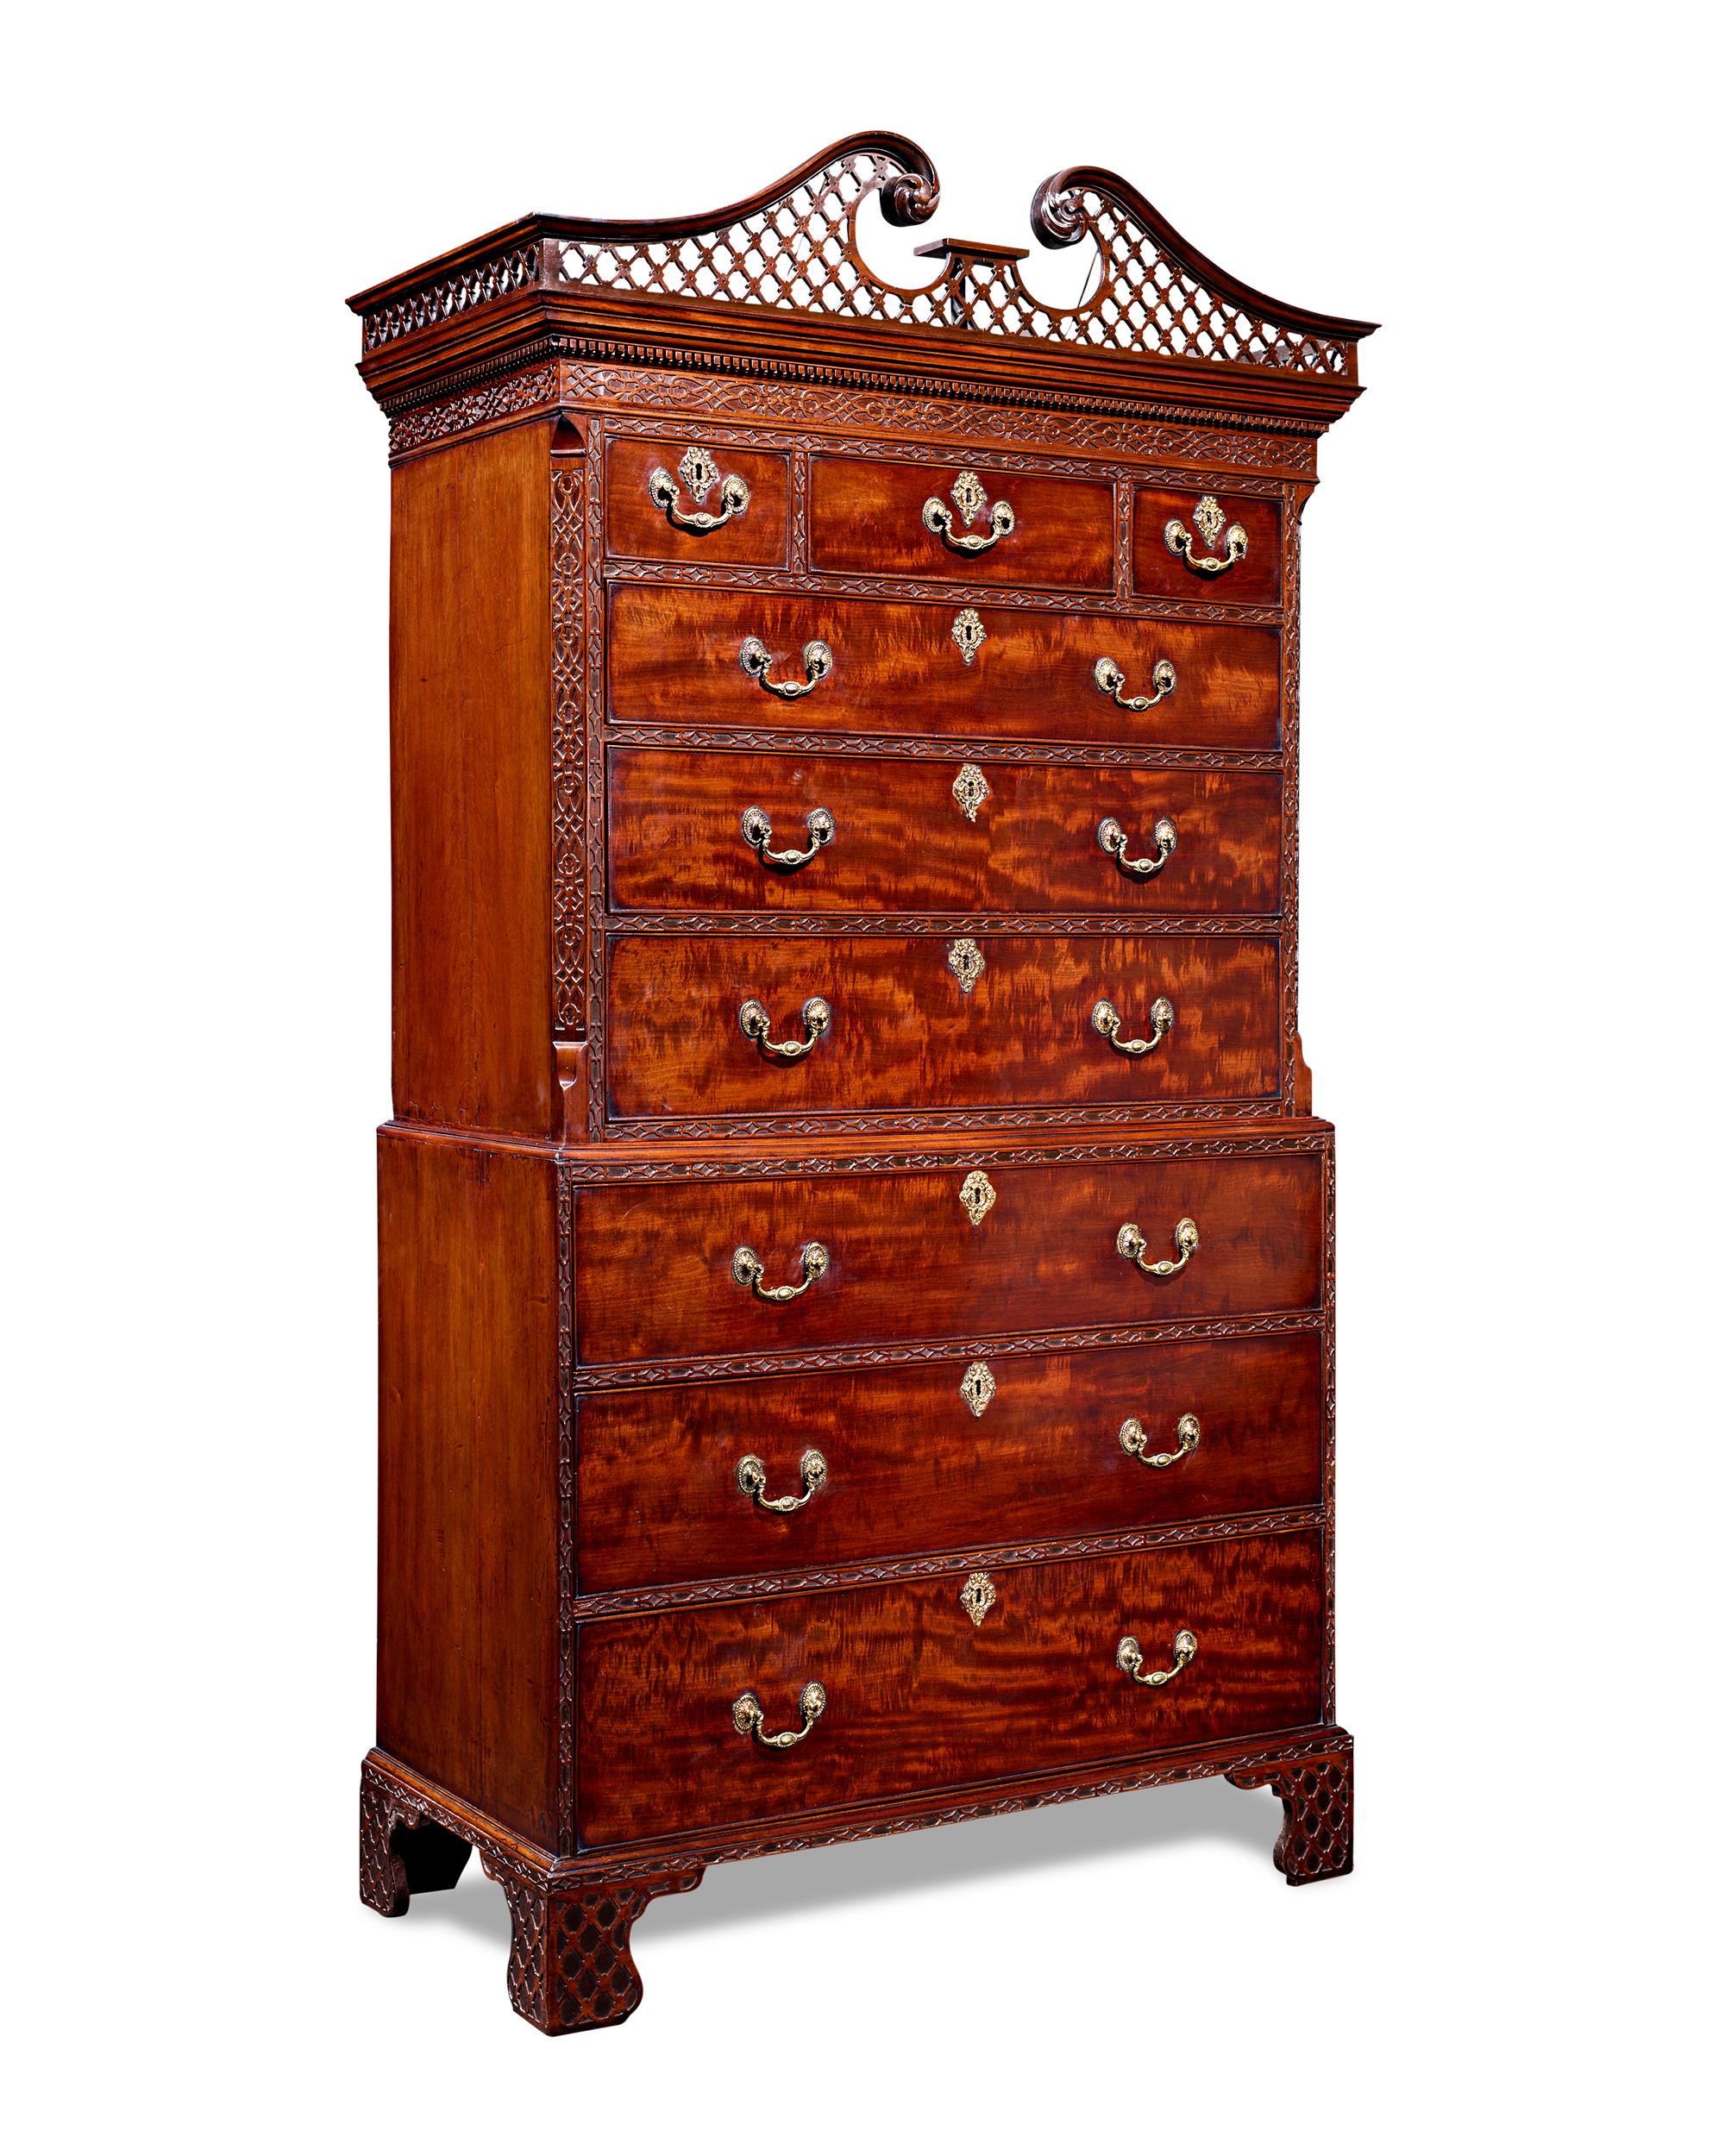 This classic chest on chest is a brilliant specimen of late Georgian furniture both in its exceptional craftsmanship and design. Crafted of Cuban mahogany that has aged to a rich patina, the chest boasts the symmetry, elegant lines and precise